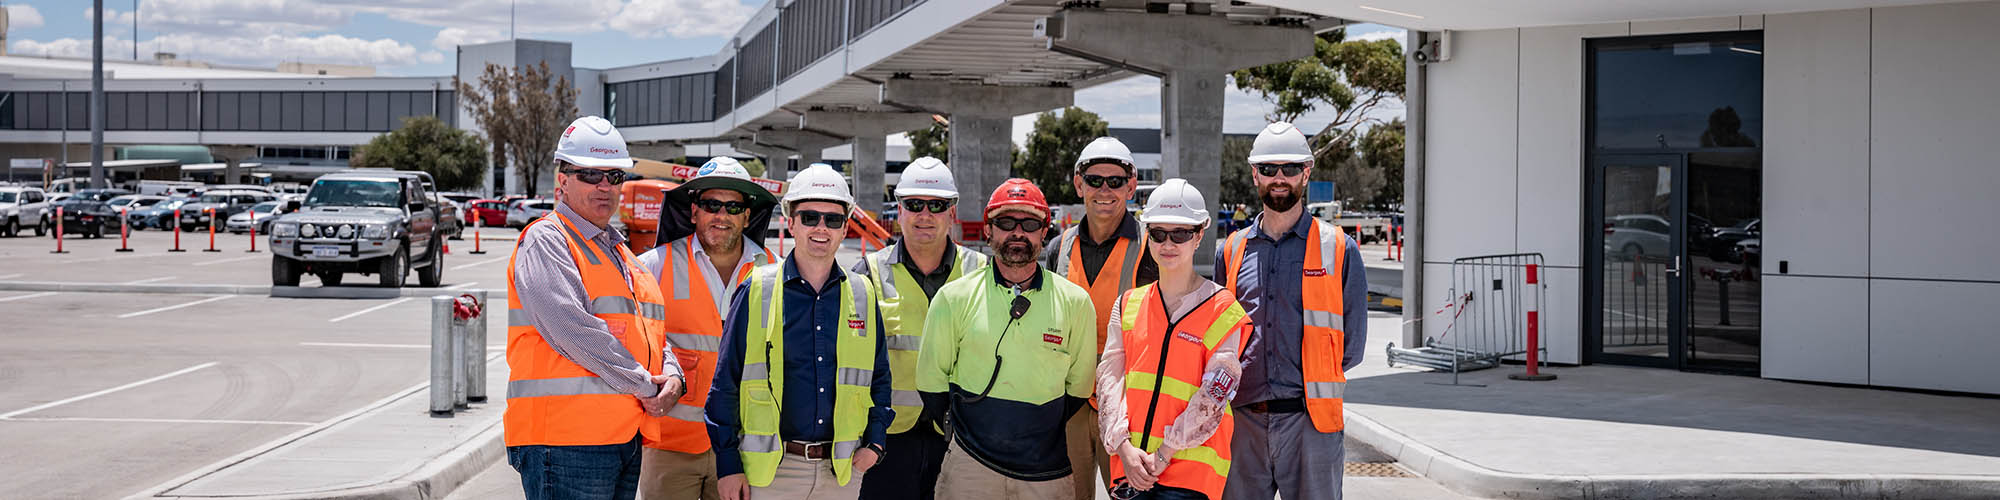 Image for GEORGIOU CLOSE TO COMPLETION AT PERTH AIRPORT SKYBRIDGE